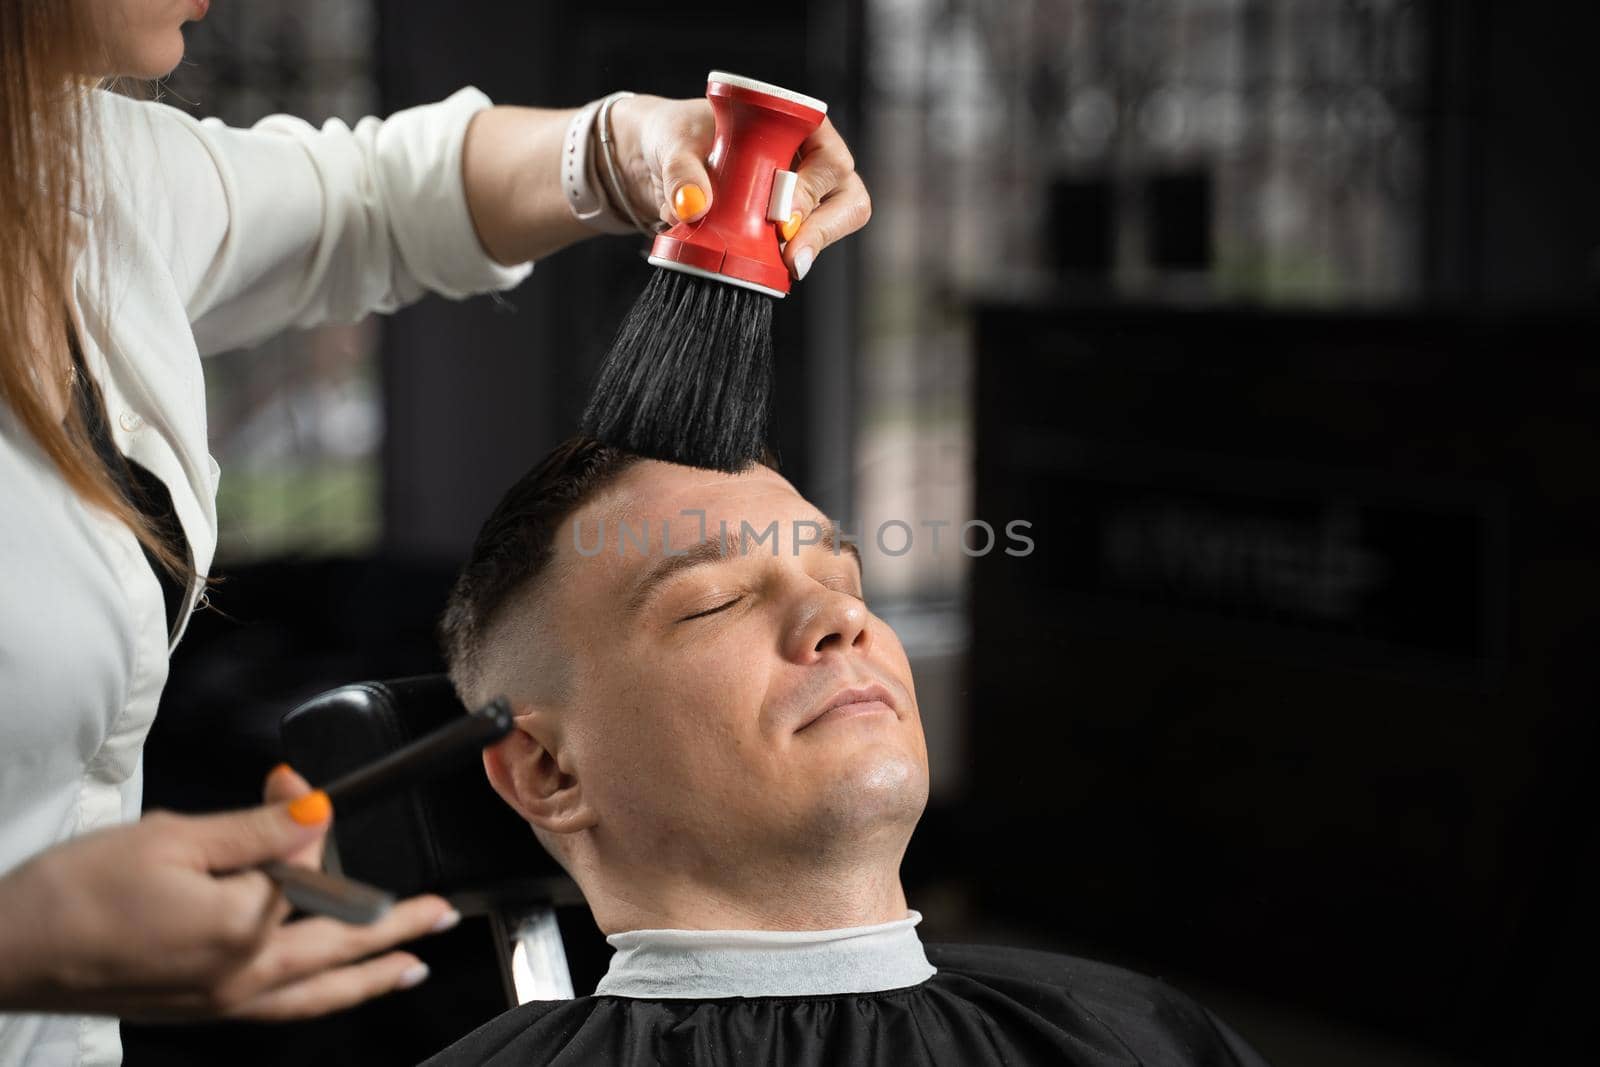 Barbershop service. Cutting hair. Hairstyle for handsome man